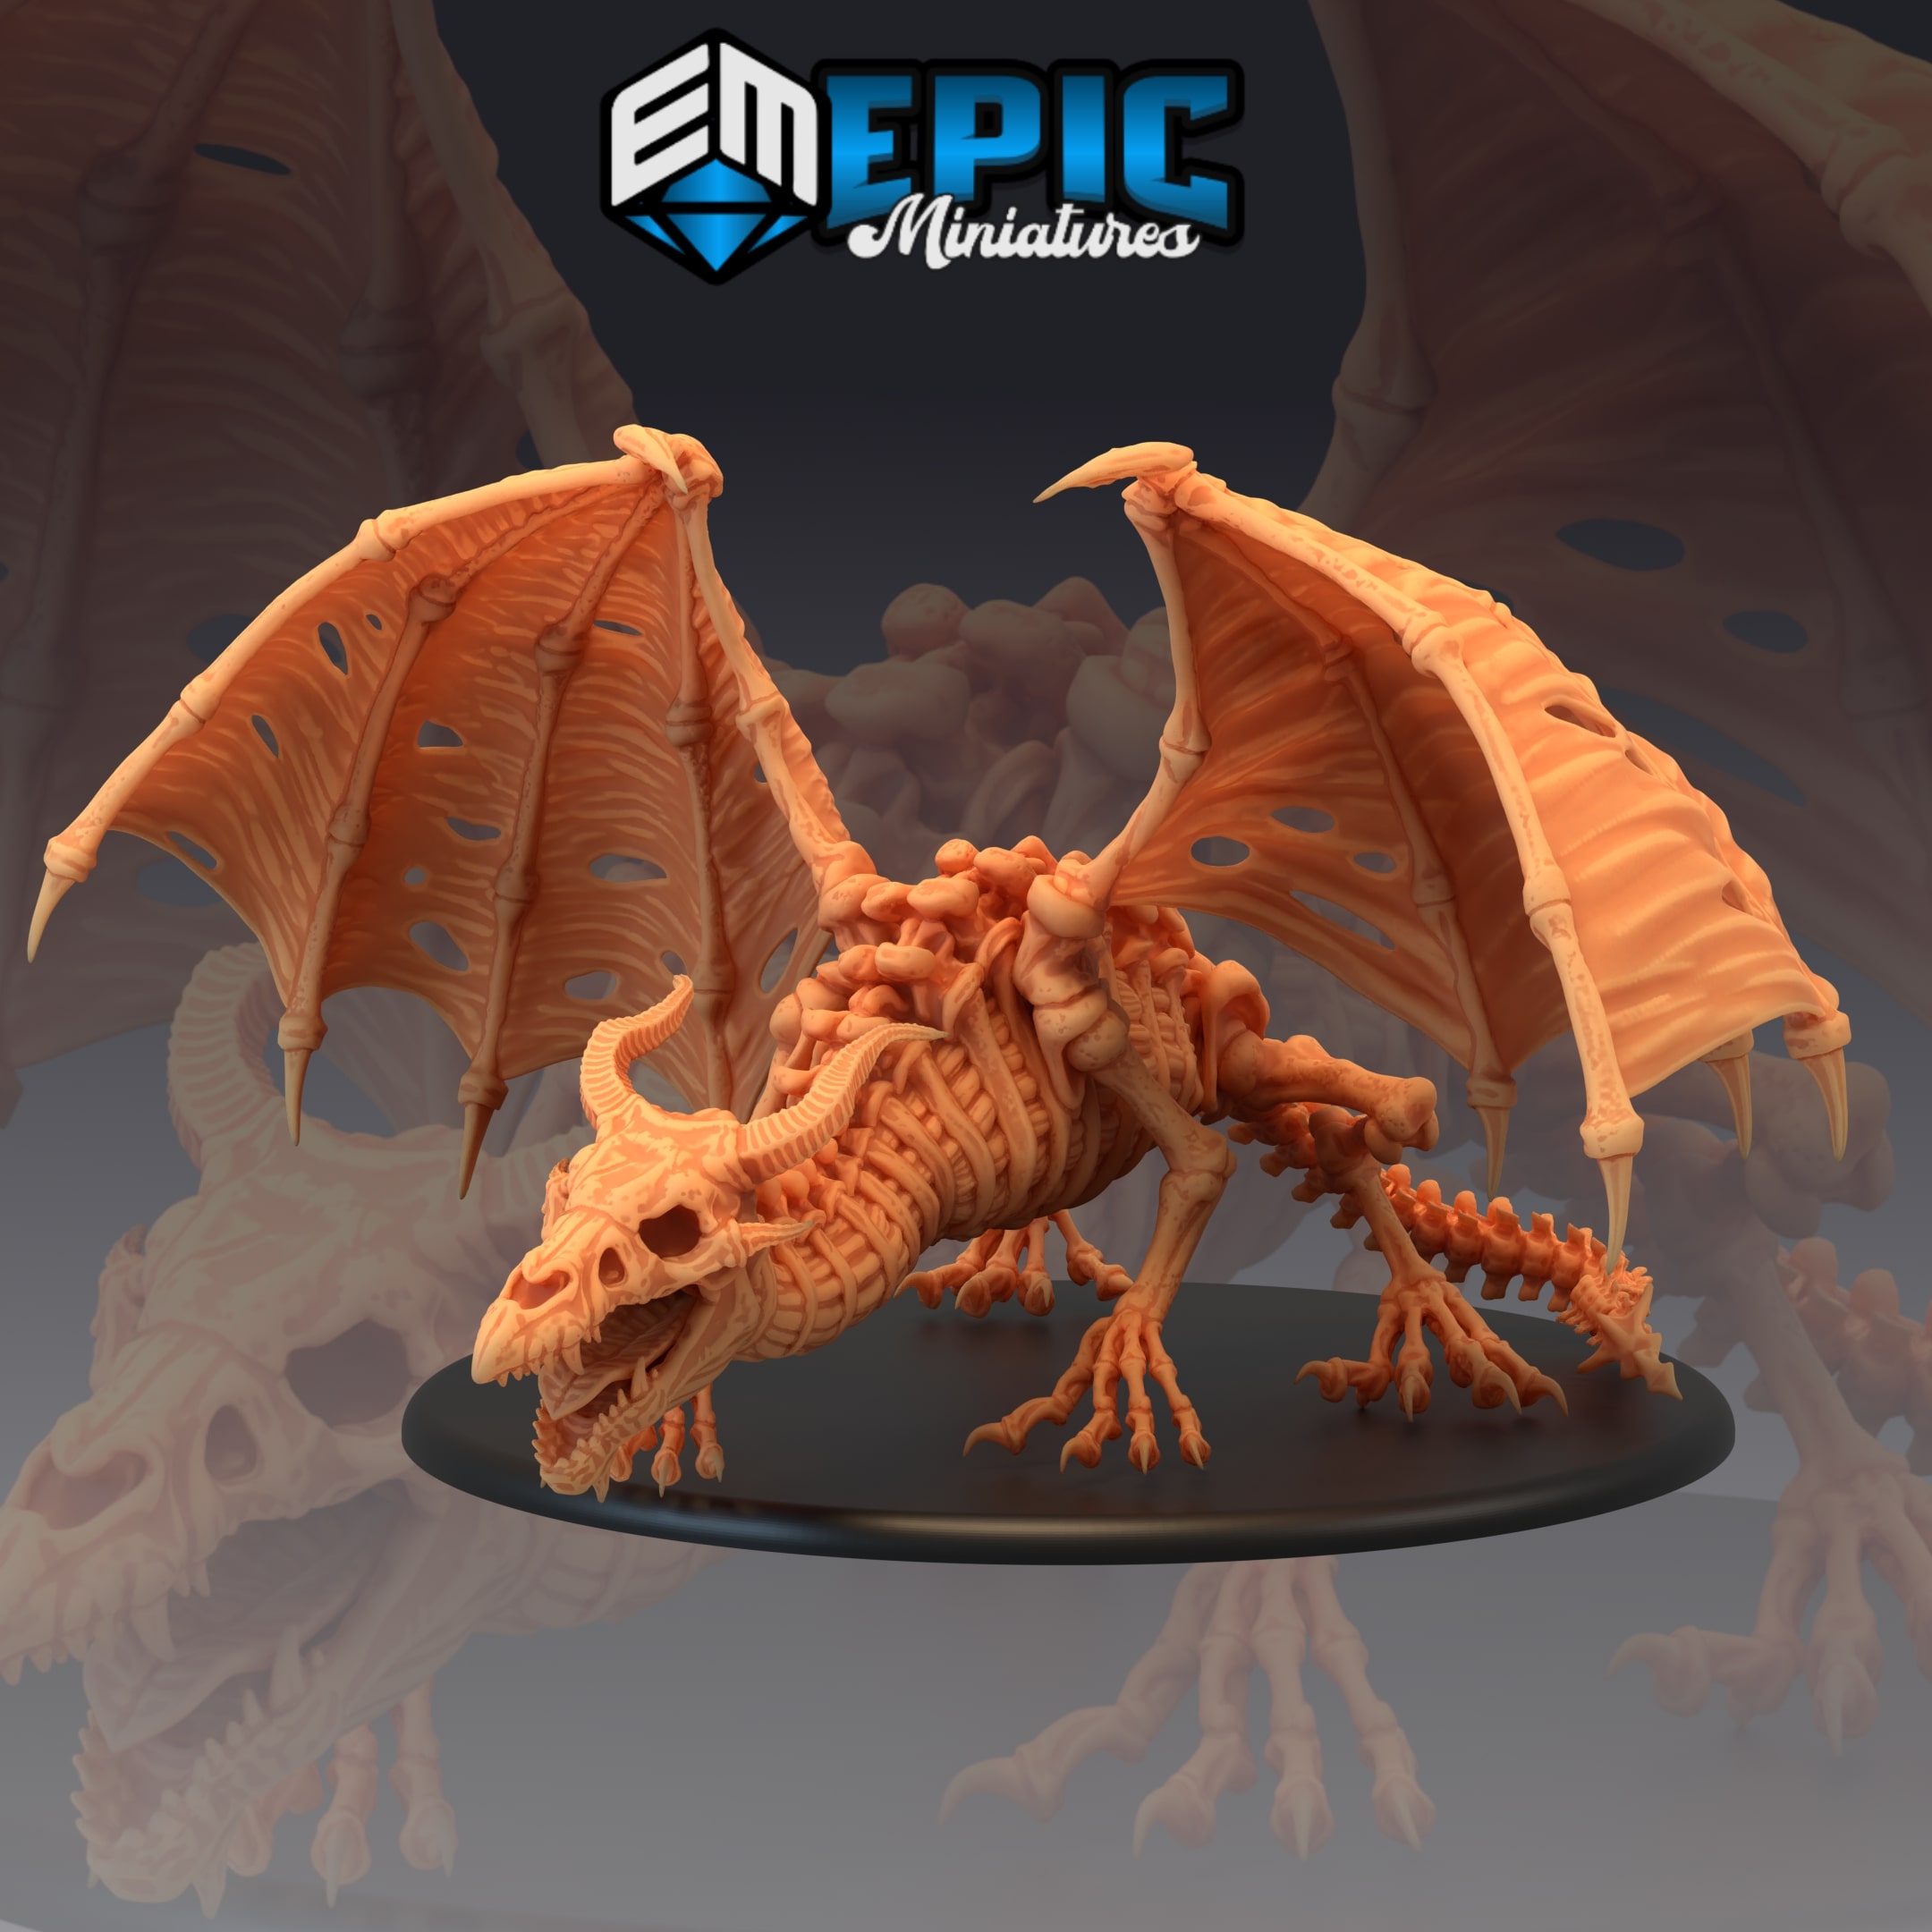 Draco Lich (Gargantuan) - dungeons and dragons miniatures for sale is made by epic miniature that is highly recommended. Dragon miniatures